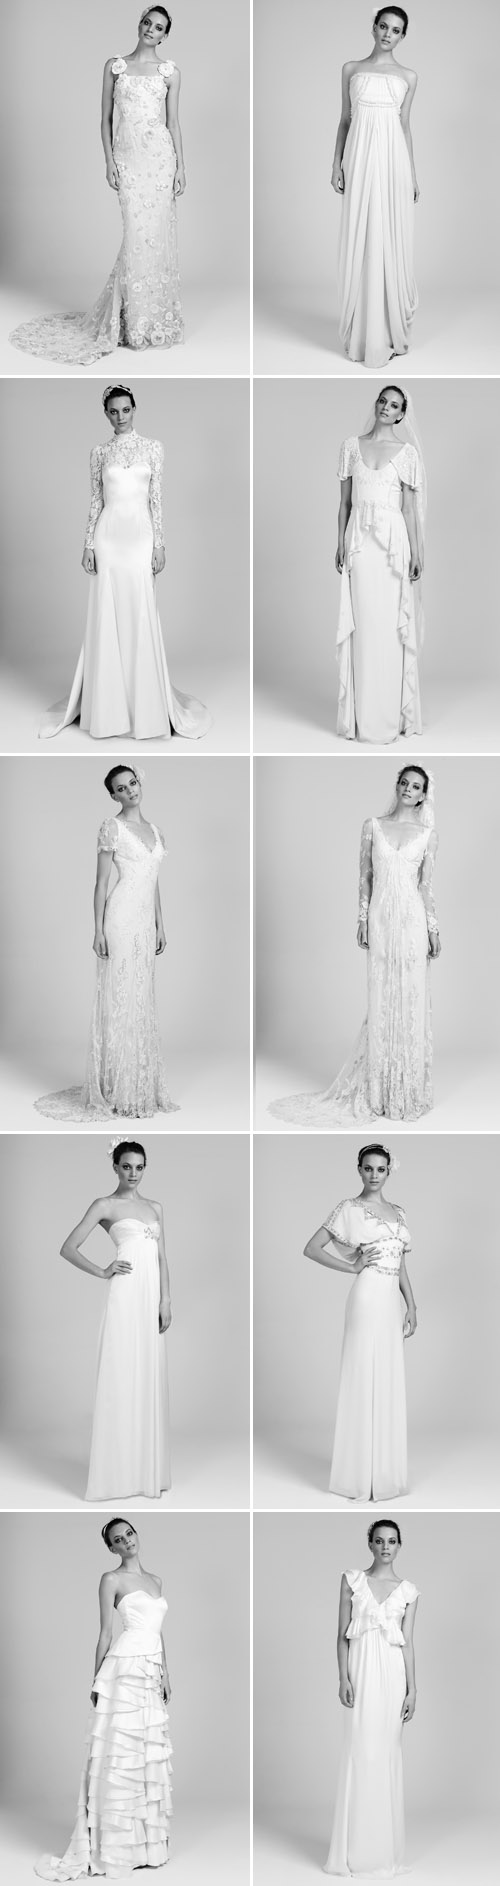 Temperley London bridal collection, romantic vintage inspired wedding dresses